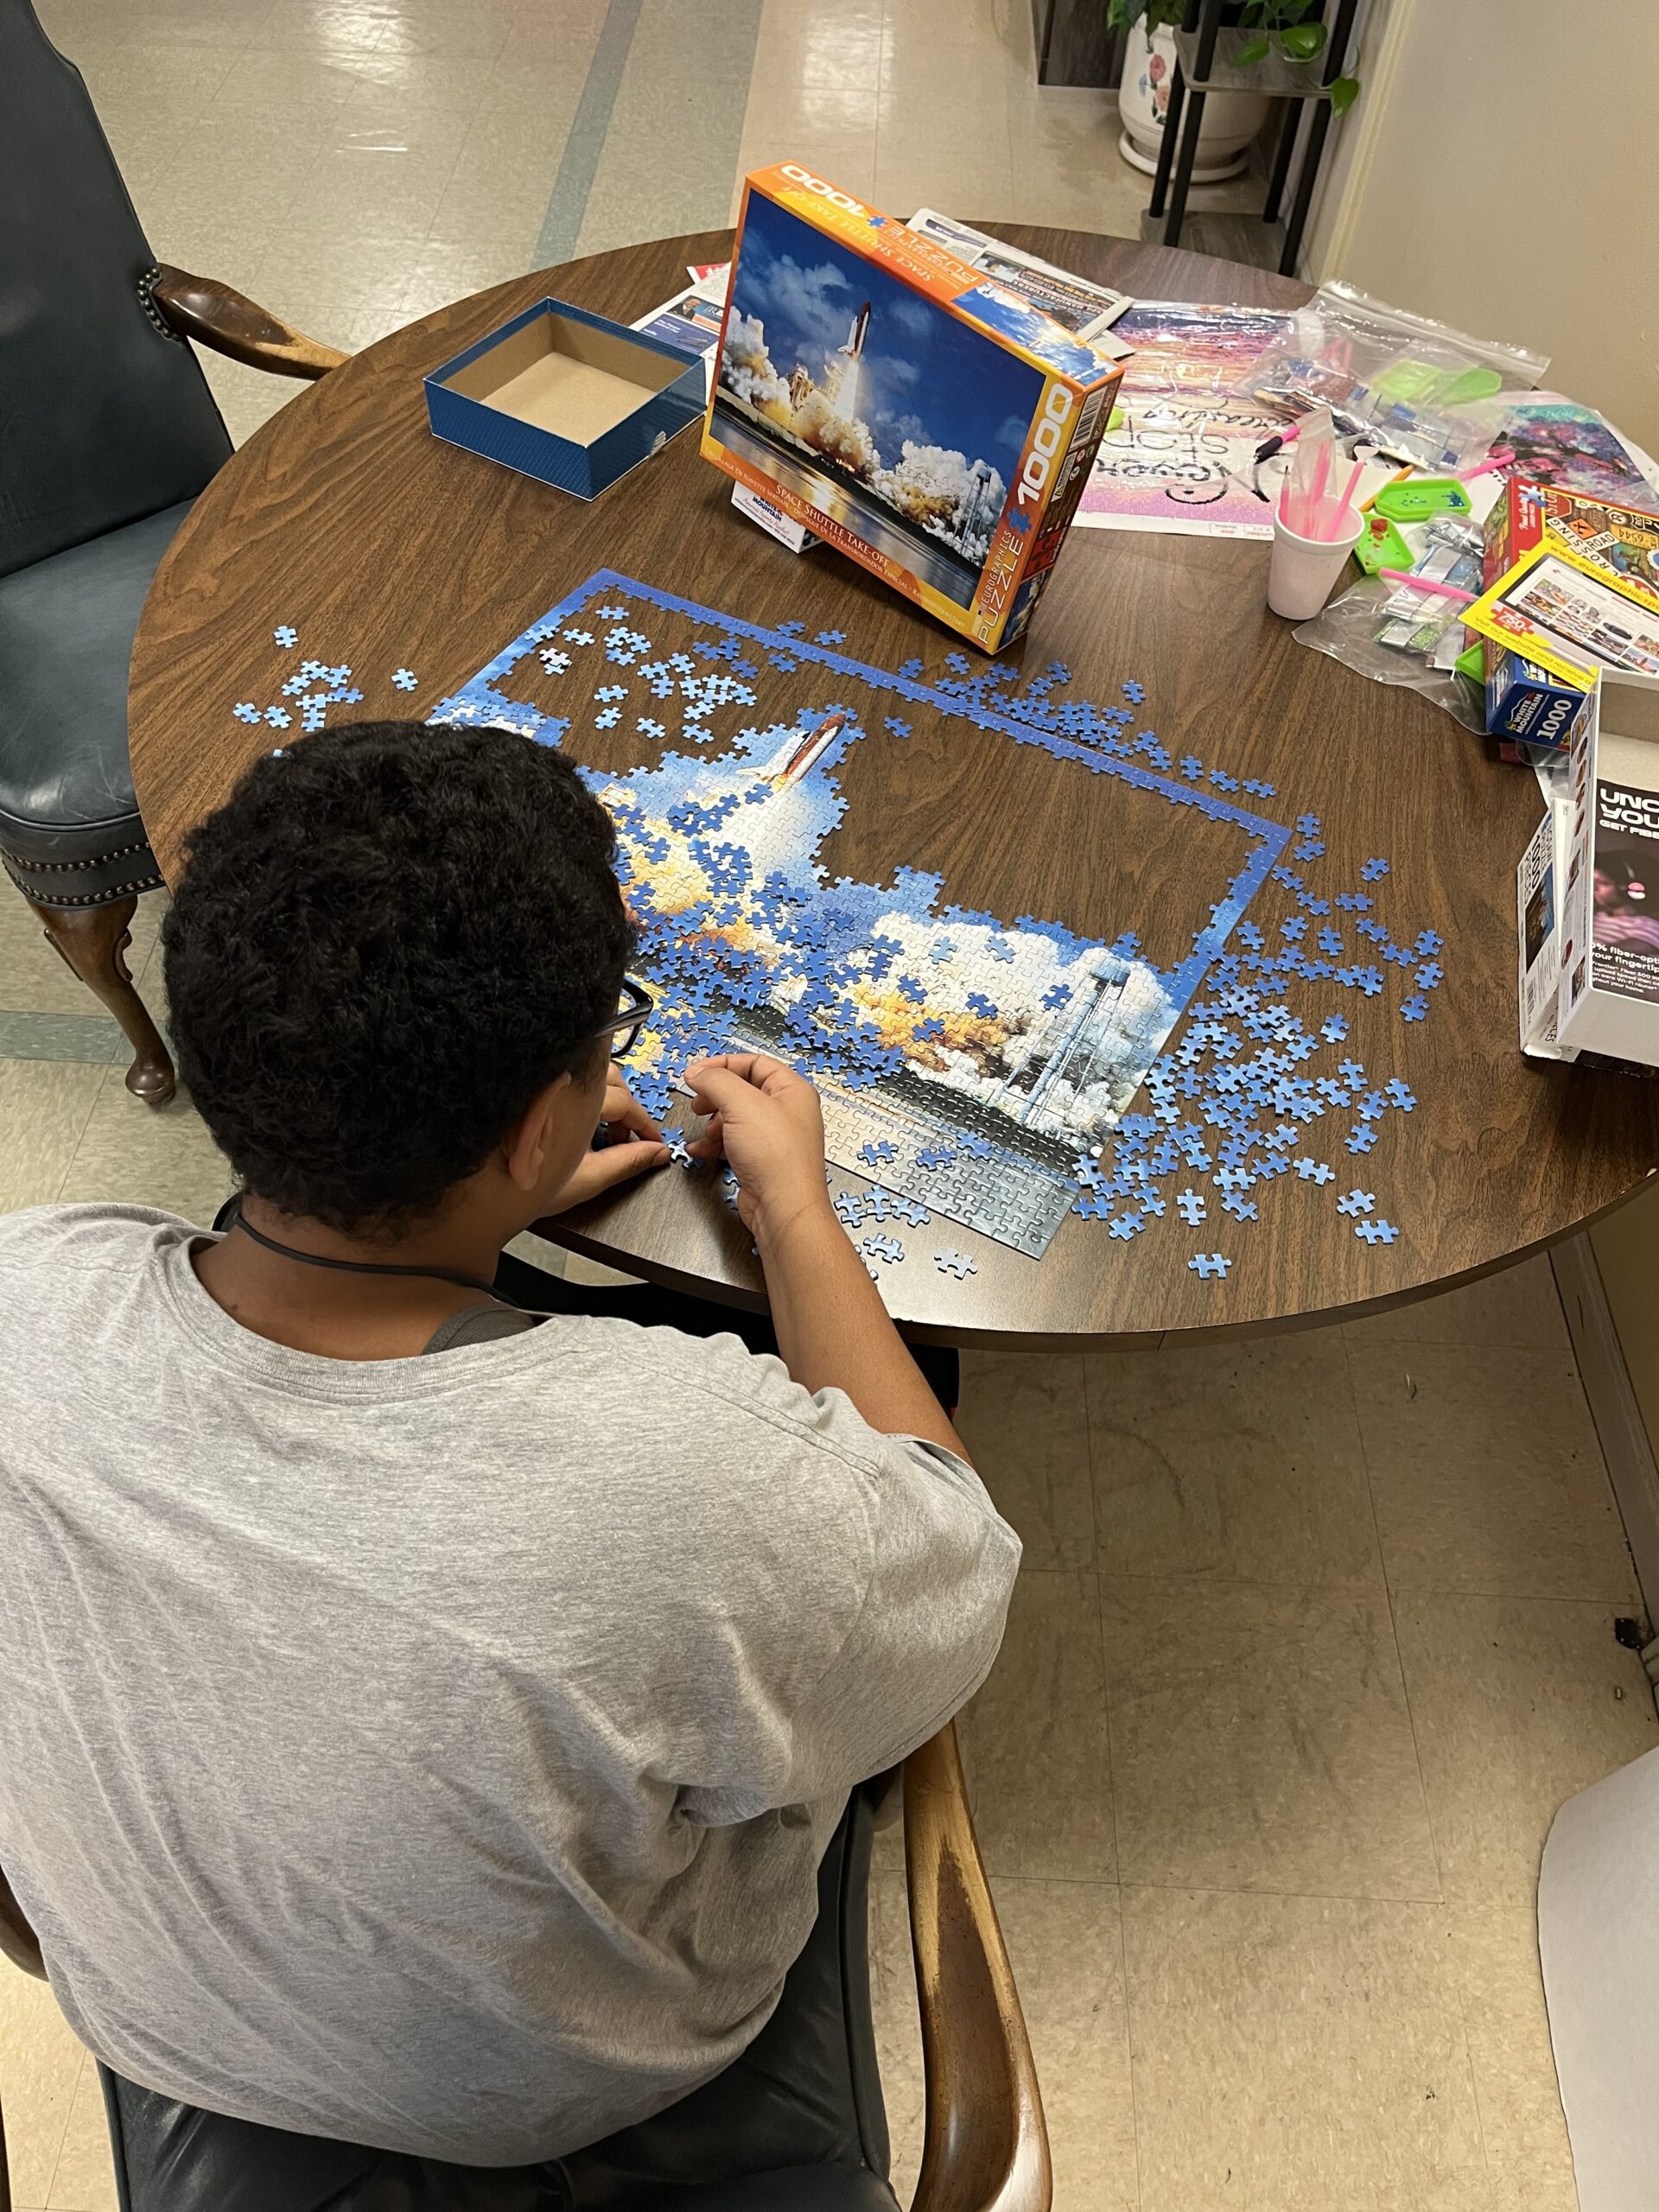 Person completing a puzzle at a round table.